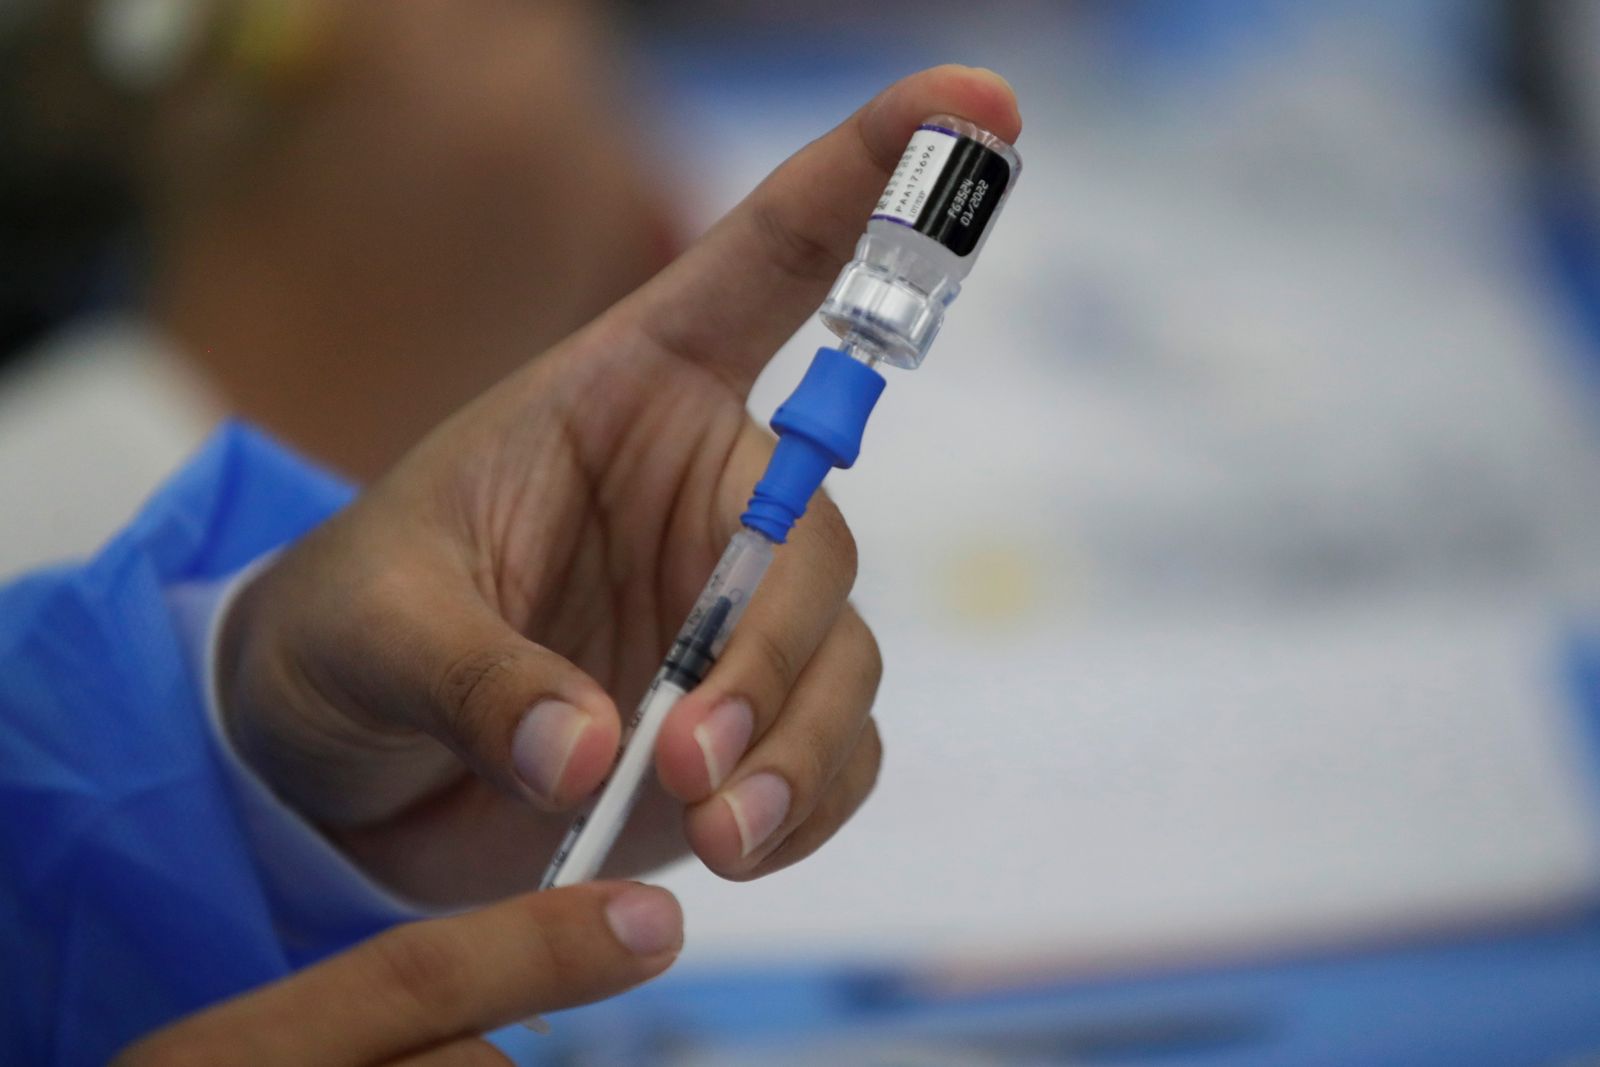 epa09660553 A health worker prepares to inject a dose of Covid-19 vaccine during a vaccination drive at the Albrook Mall in Panama City, Panama, 29 December 2021 (issued 30 December 2021). According to Dr. Eduardo Ortega-Barria, head of the National Secretariat of Science, Technology and Innovation (Senacyt), even though the Covid-19 vaccination is widely accepted throughout Panama, the country will face a critical period at the beginning of 2022 due to the rapid spread of the coronavirus Omicron variant of concern.  EPA/Bienvenido Velasco